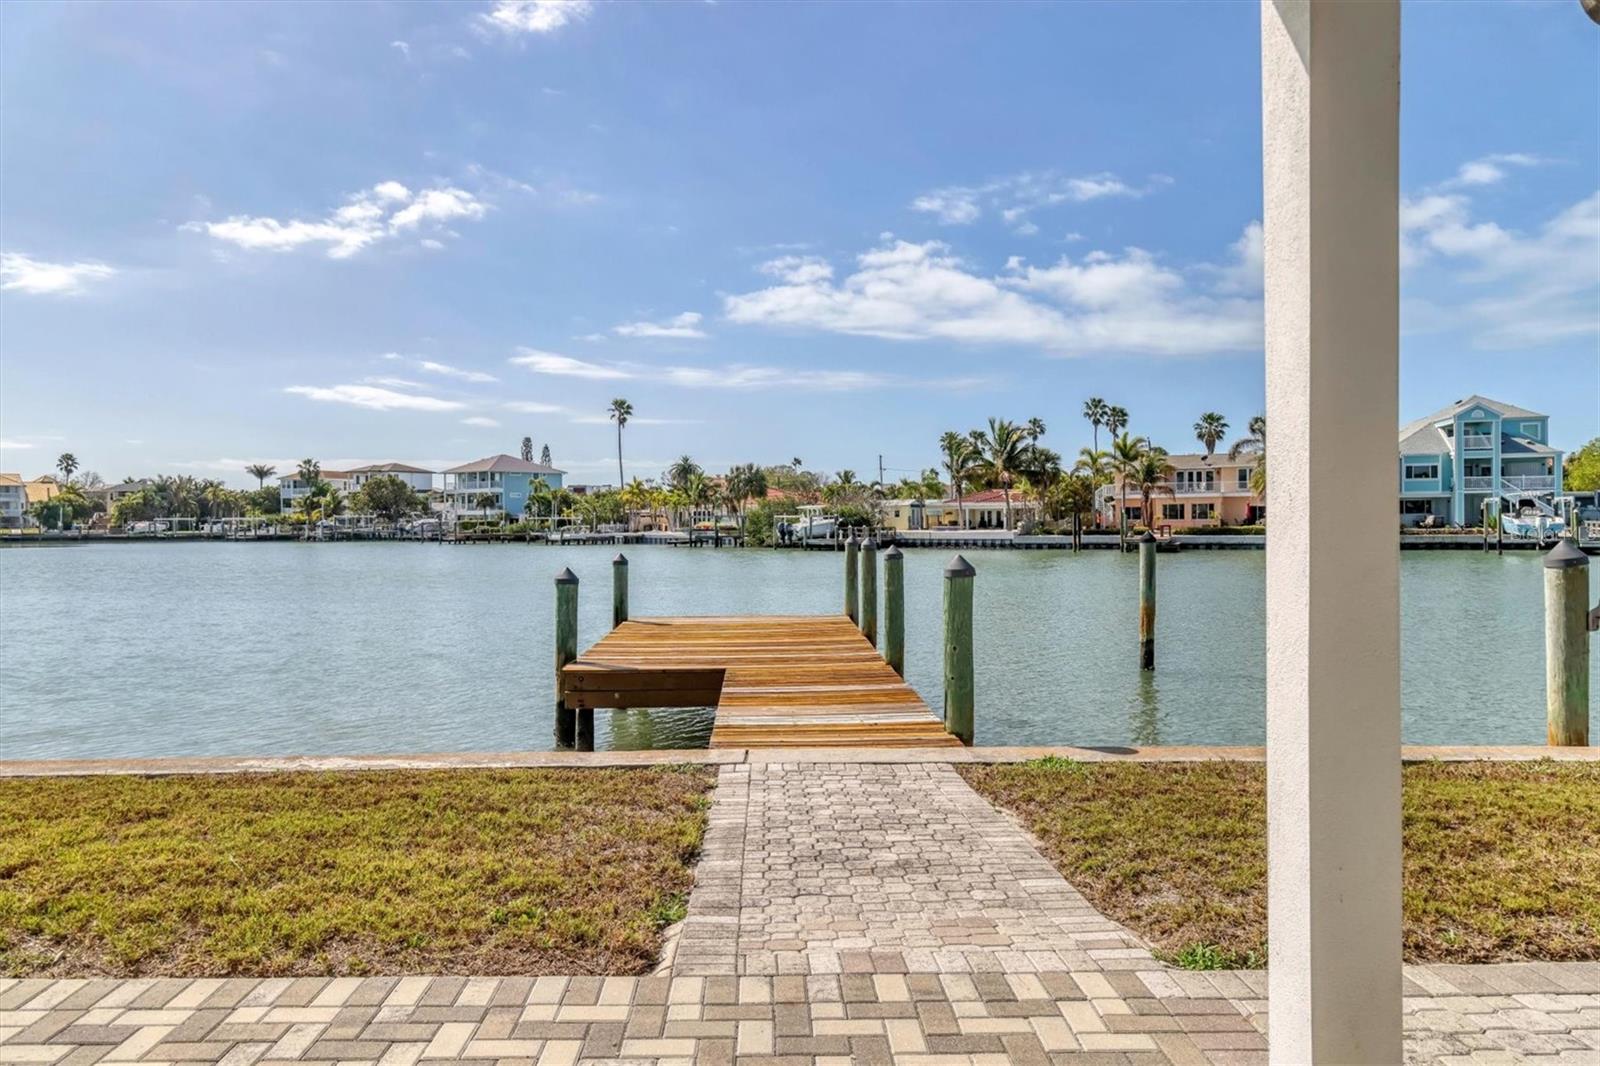 Bring your boat to this deep water dock